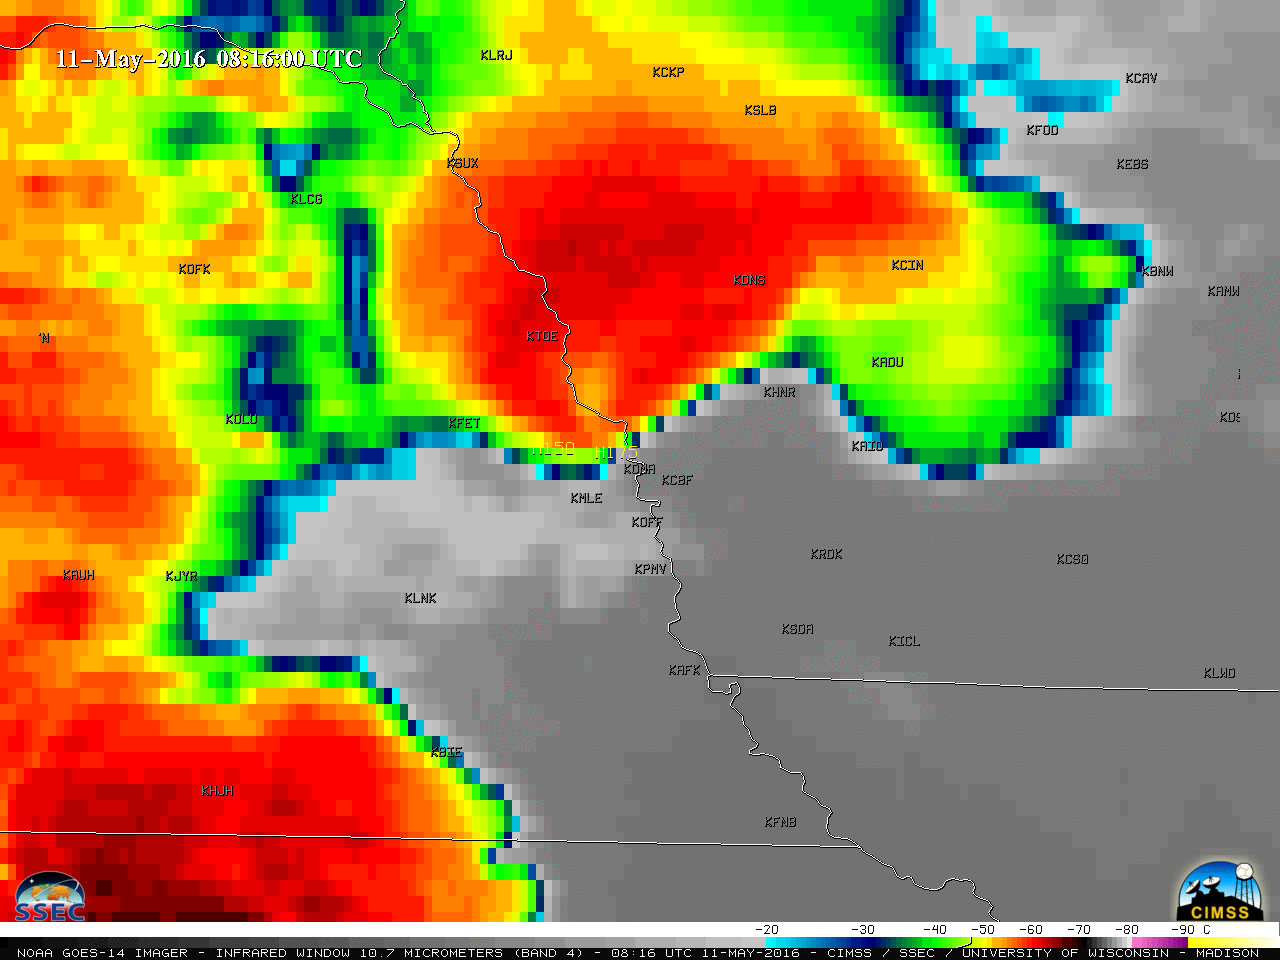 GOES-14 Infrared Window (10.7 µm) images, with parallax-corrected SPC storm reports [click to play animation]